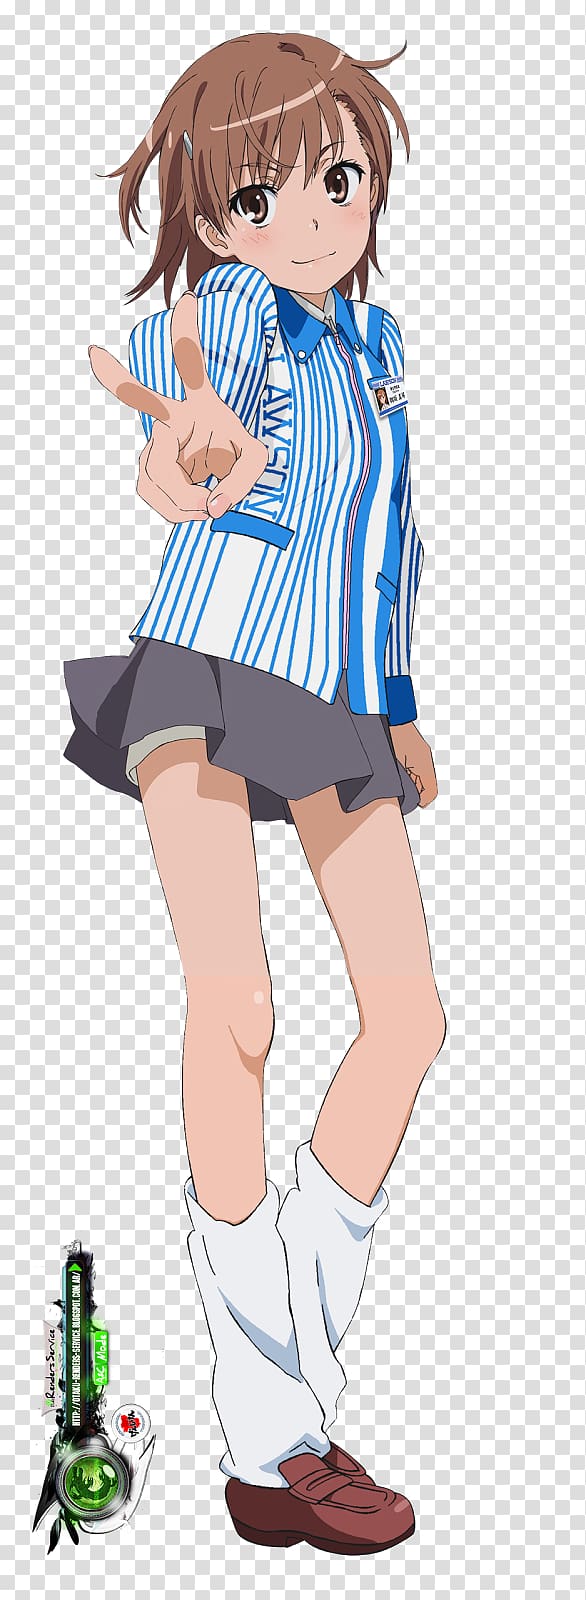 Mikoto Misaka A Certain Scientific Railgun A Certain Magical Index Anime, and pleated skirt transparent background PNG clipart